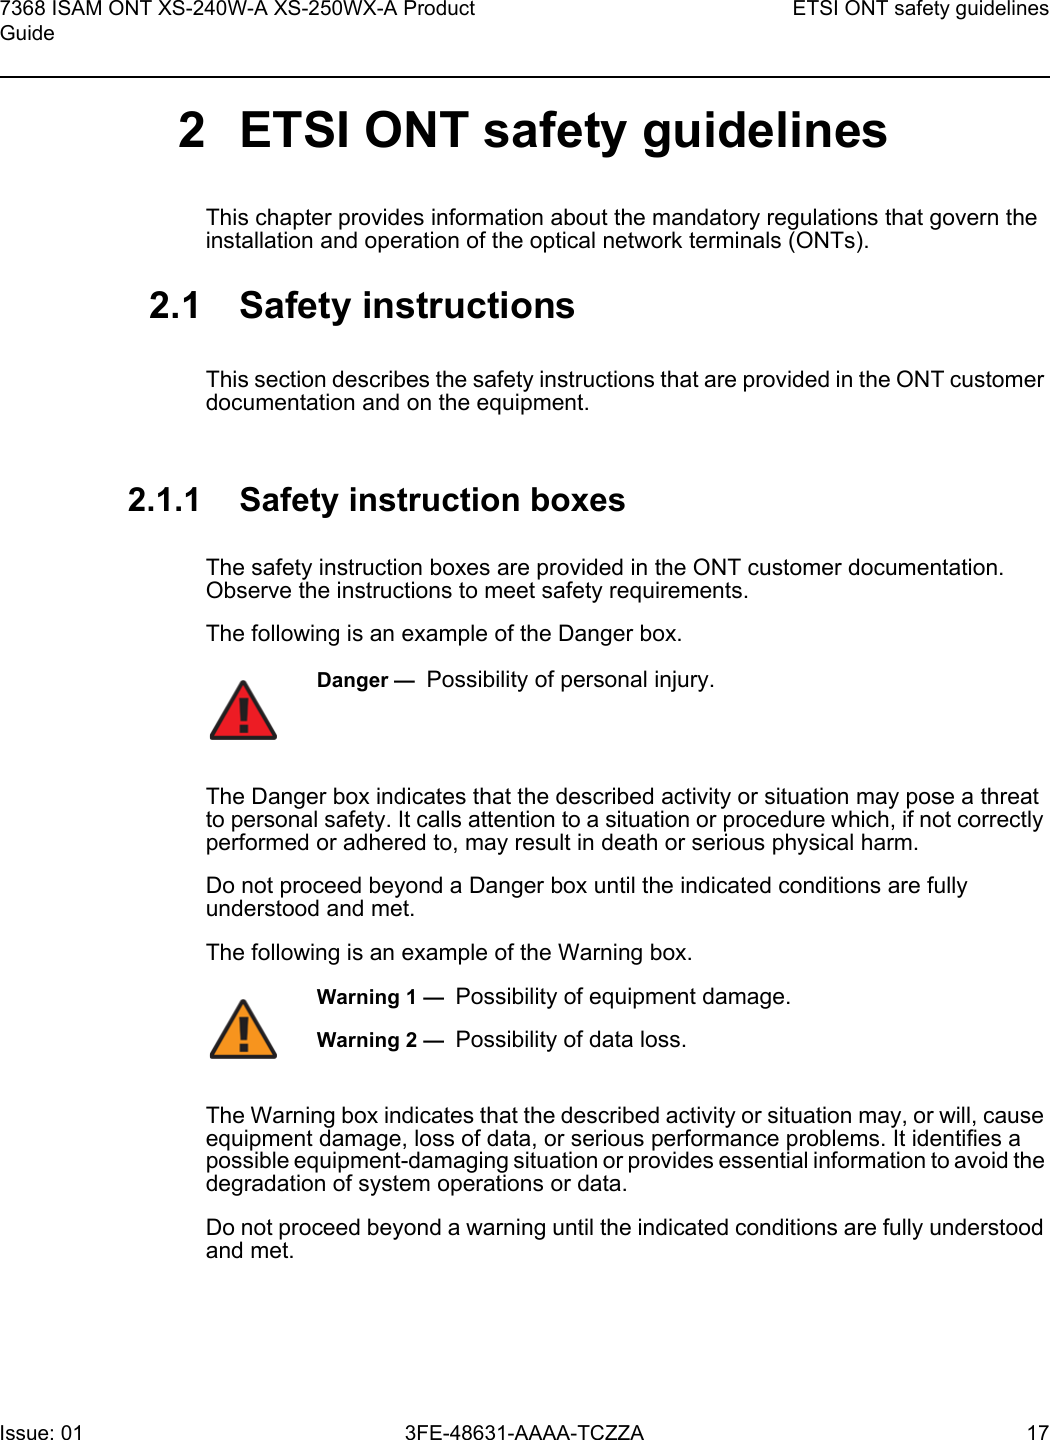 7368 ISAM ONT XS-240W-A XS-250WX-A Product GuideETSI ONT safety guidelinesIssue: 01 3FE-48631-AAAA-TCZZA 17 2 ETSI ONT safety guidelinesThis chapter provides information about the mandatory regulations that govern the installation and operation of the optical network terminals (ONTs).2.1 Safety instructionsThis section describes the safety instructions that are provided in the ONT customer documentation and on the equipment.2.1.1 Safety instruction boxesThe safety instruction boxes are provided in the ONT customer documentation. Observe the instructions to meet safety requirements.The following is an example of the Danger box.The Danger box indicates that the described activity or situation may pose a threat to personal safety. It calls attention to a situation or procedure which, if not correctly performed or adhered to, may result in death or serious physical harm. Do not proceed beyond a Danger box until the indicated conditions are fully understood and met.The following is an example of the Warning box.The Warning box indicates that the described activity or situation may, or will, cause equipment damage, loss of data, or serious performance problems. It identifies a possible equipment-damaging situation or provides essential information to avoid the degradation of system operations or data.Do not proceed beyond a warning until the indicated conditions are fully understood and met.Danger —  Possibility of personal injury. Warning 1 —  Possibility of equipment damage.Warning 2 —  Possibility of data loss.